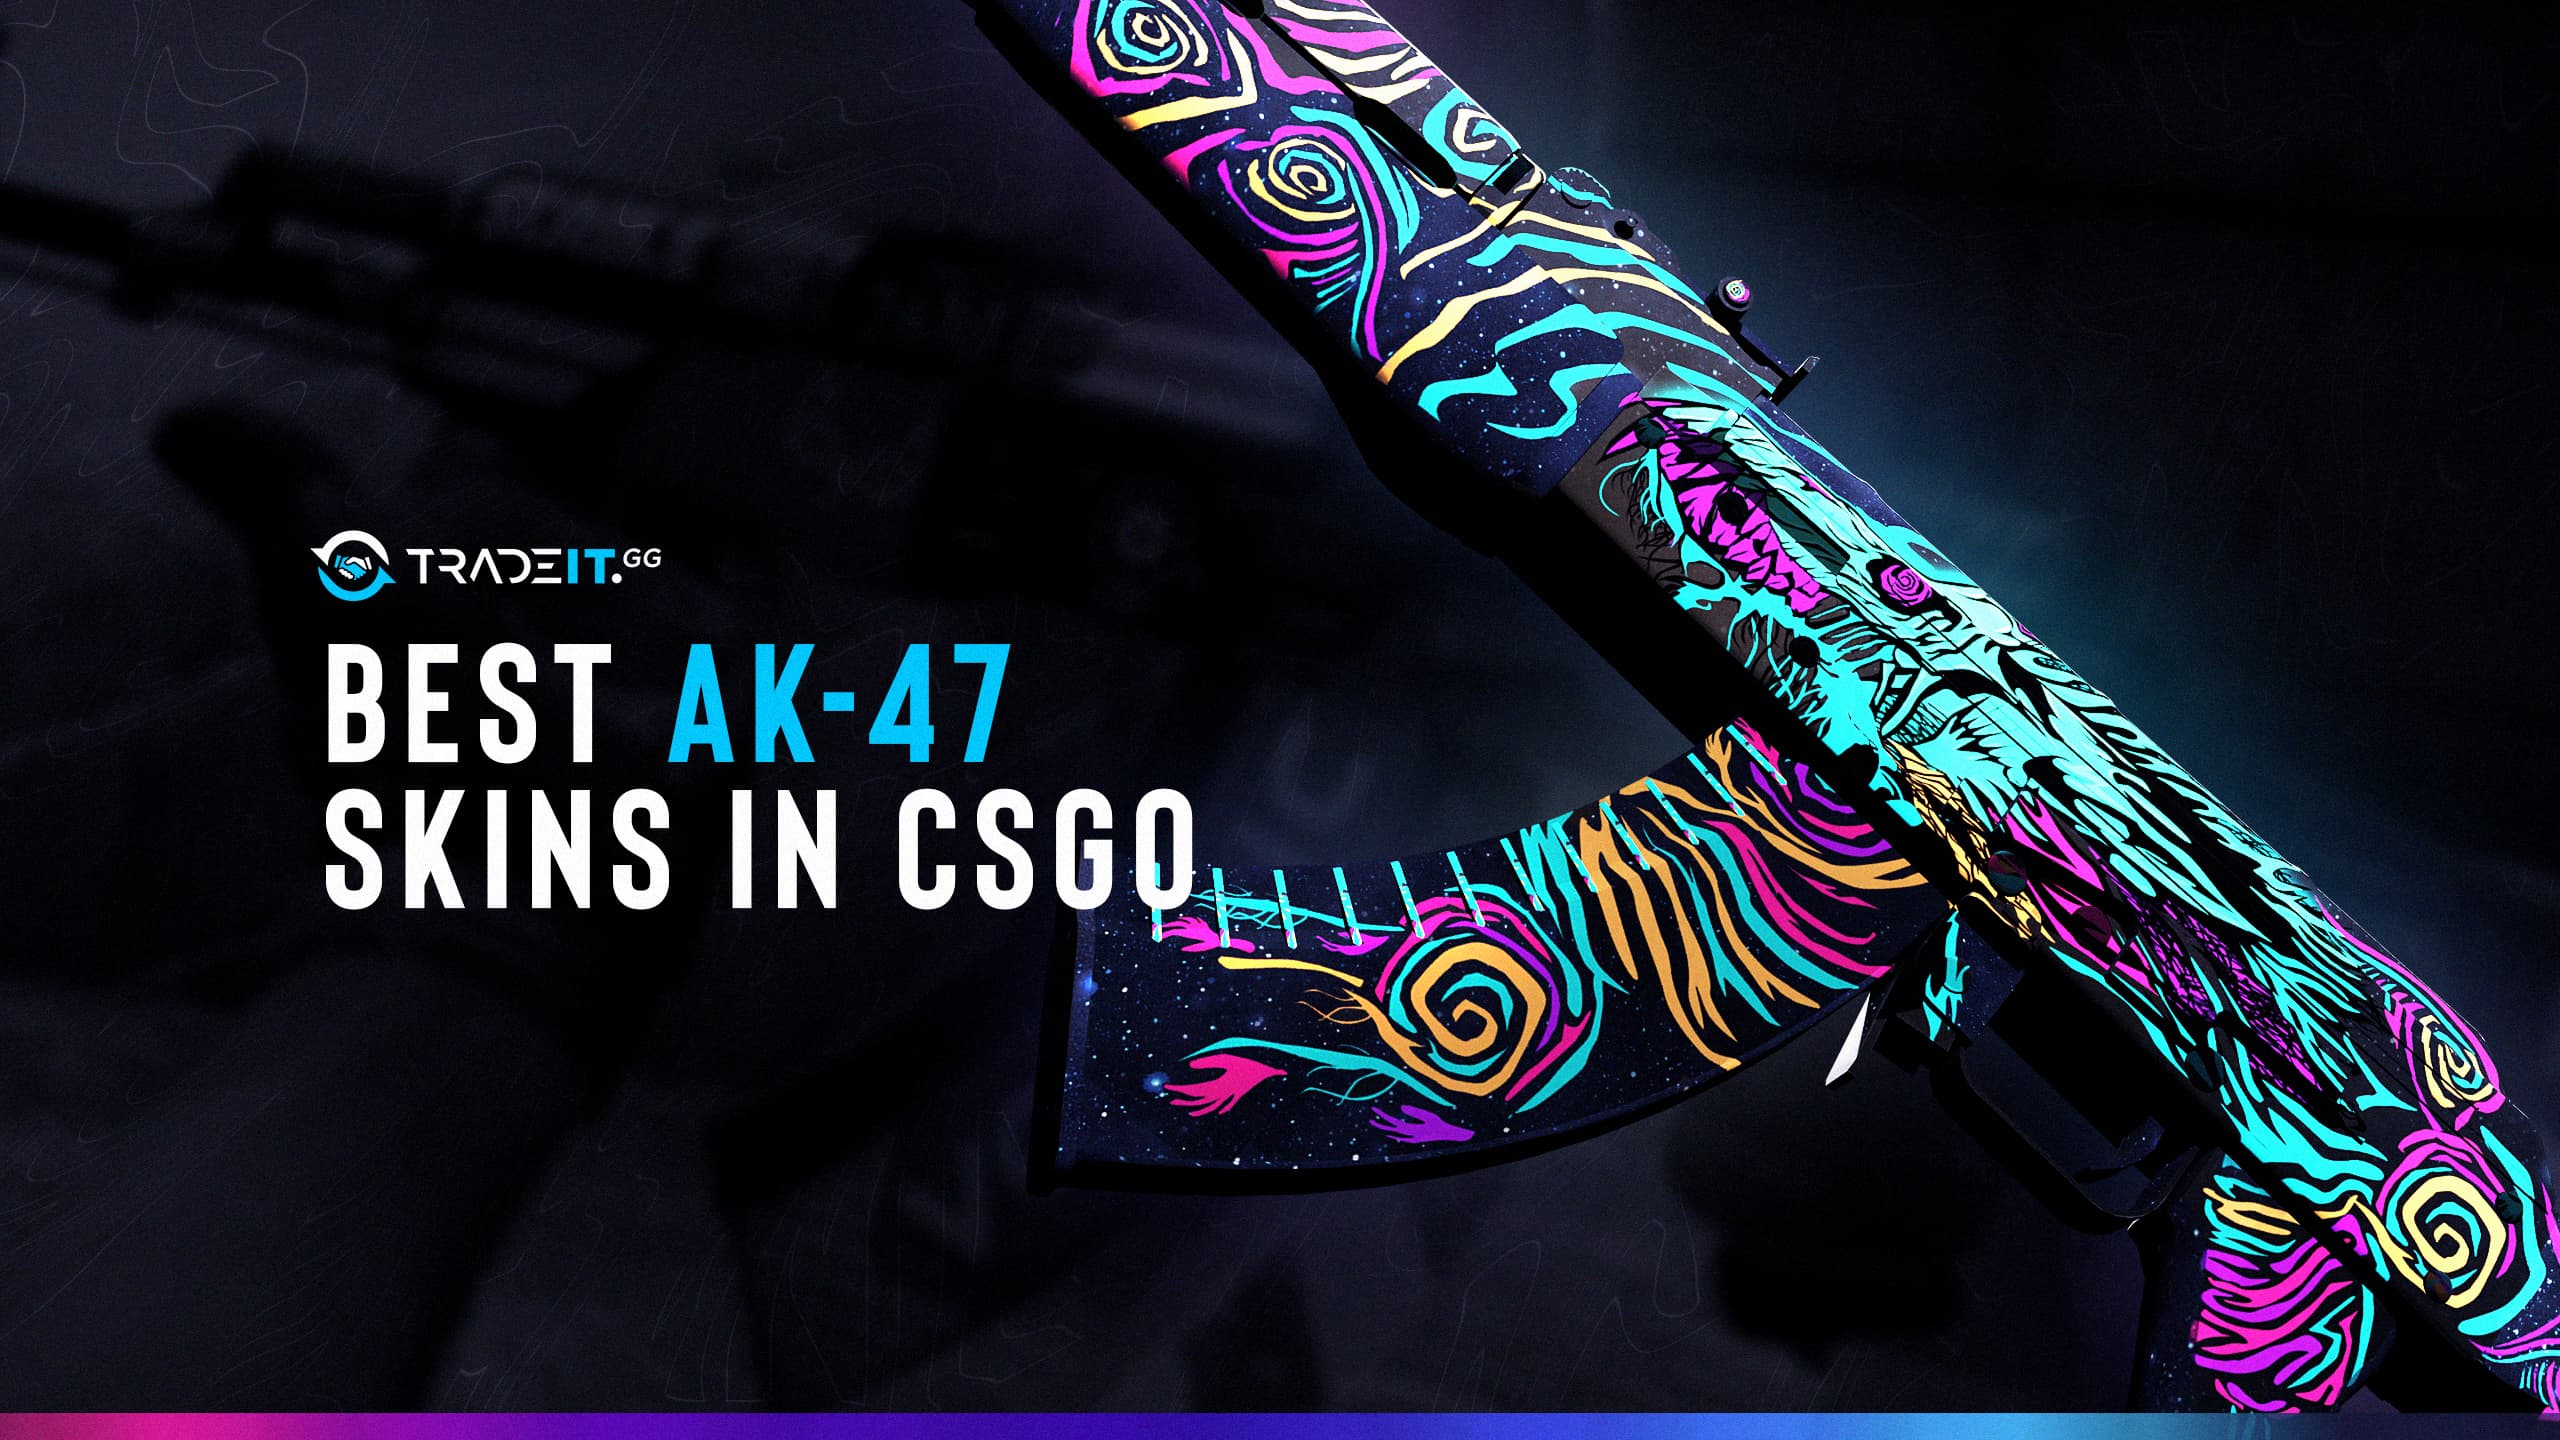 The Skins CS:GO - One of The Most Practical